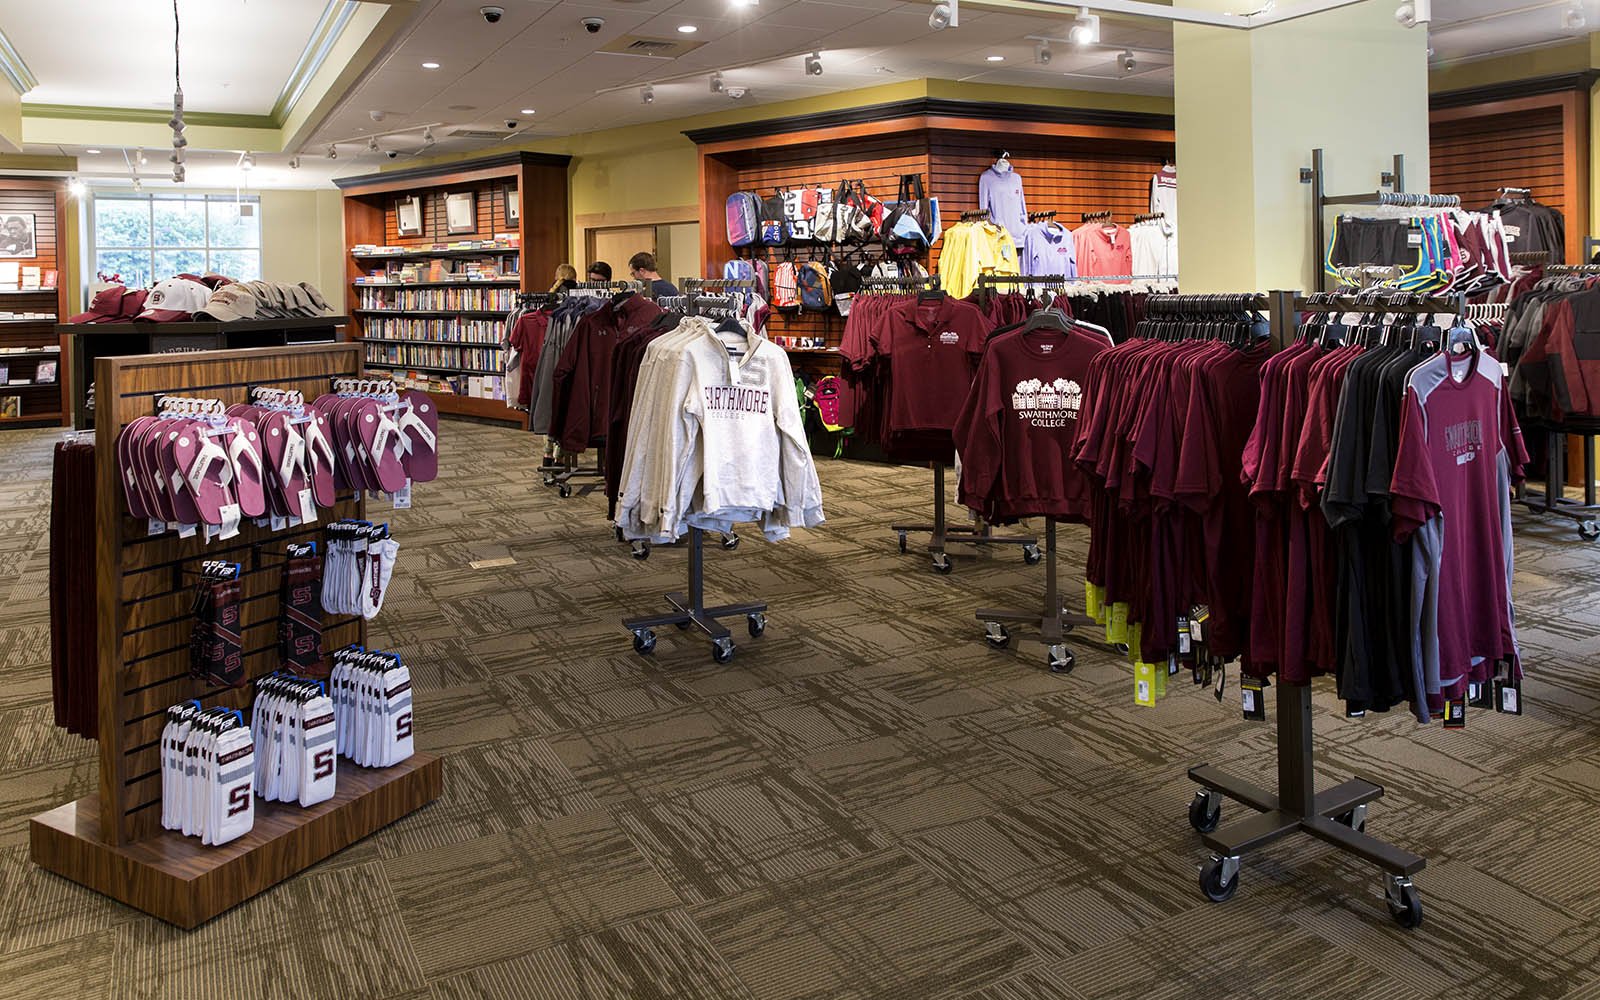 Items for sale at the Swarthmore College Bookstore